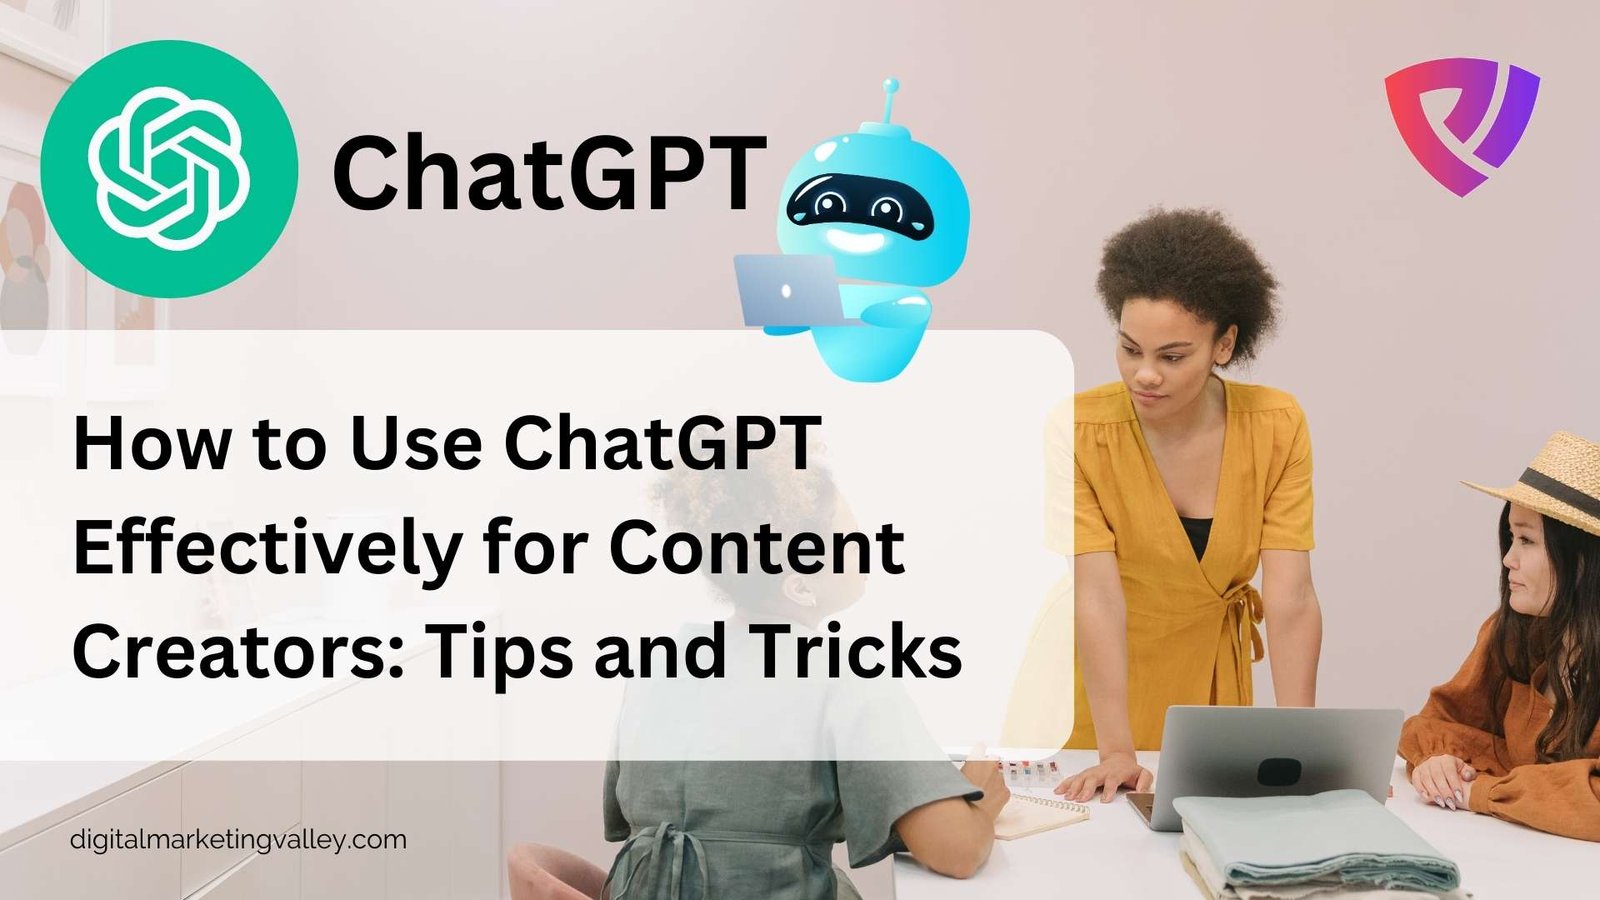 How to Use ChatGPT Effectively for Content Creators: Tips and Tricks